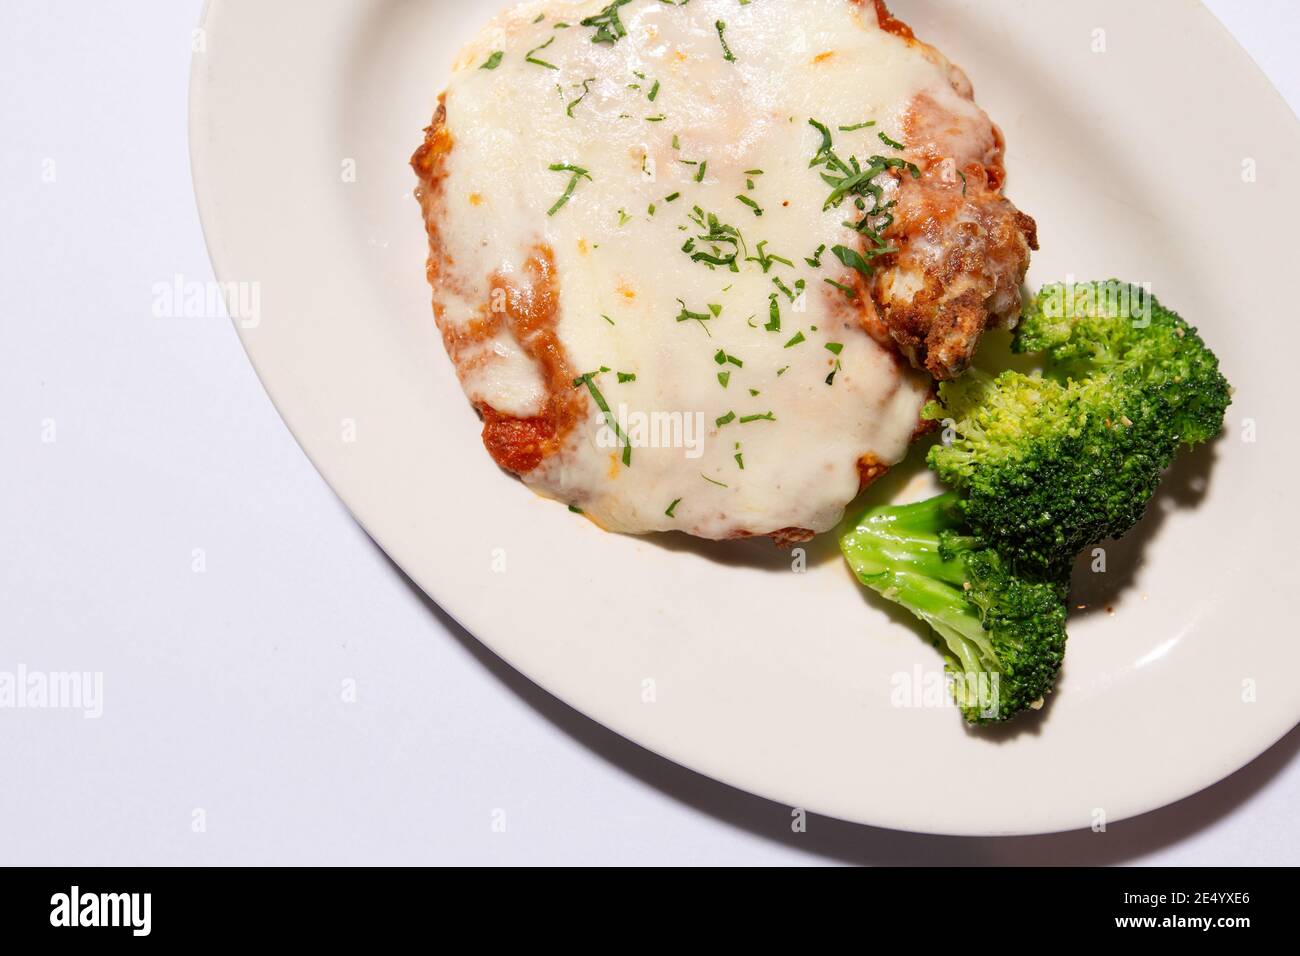 High Angle View Crop of Veal Parmesan with Broccoli Stock Photo